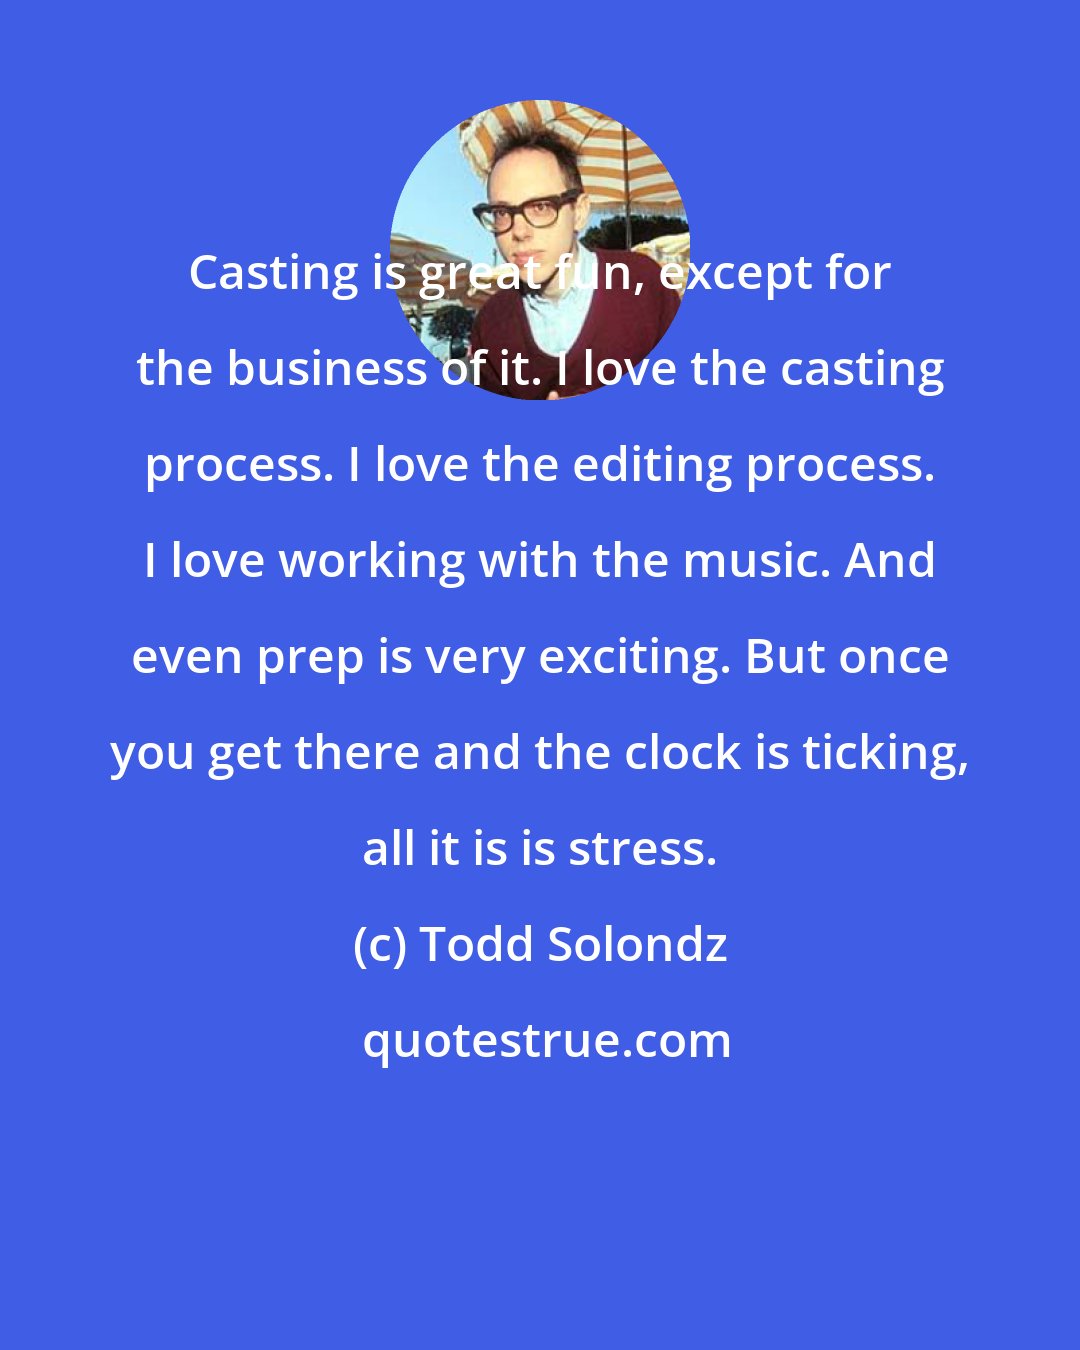 Todd Solondz: Casting is great fun, except for the business of it. I love the casting process. I love the editing process. I love working with the music. And even prep is very exciting. But once you get there and the clock is ticking, all it is is stress.